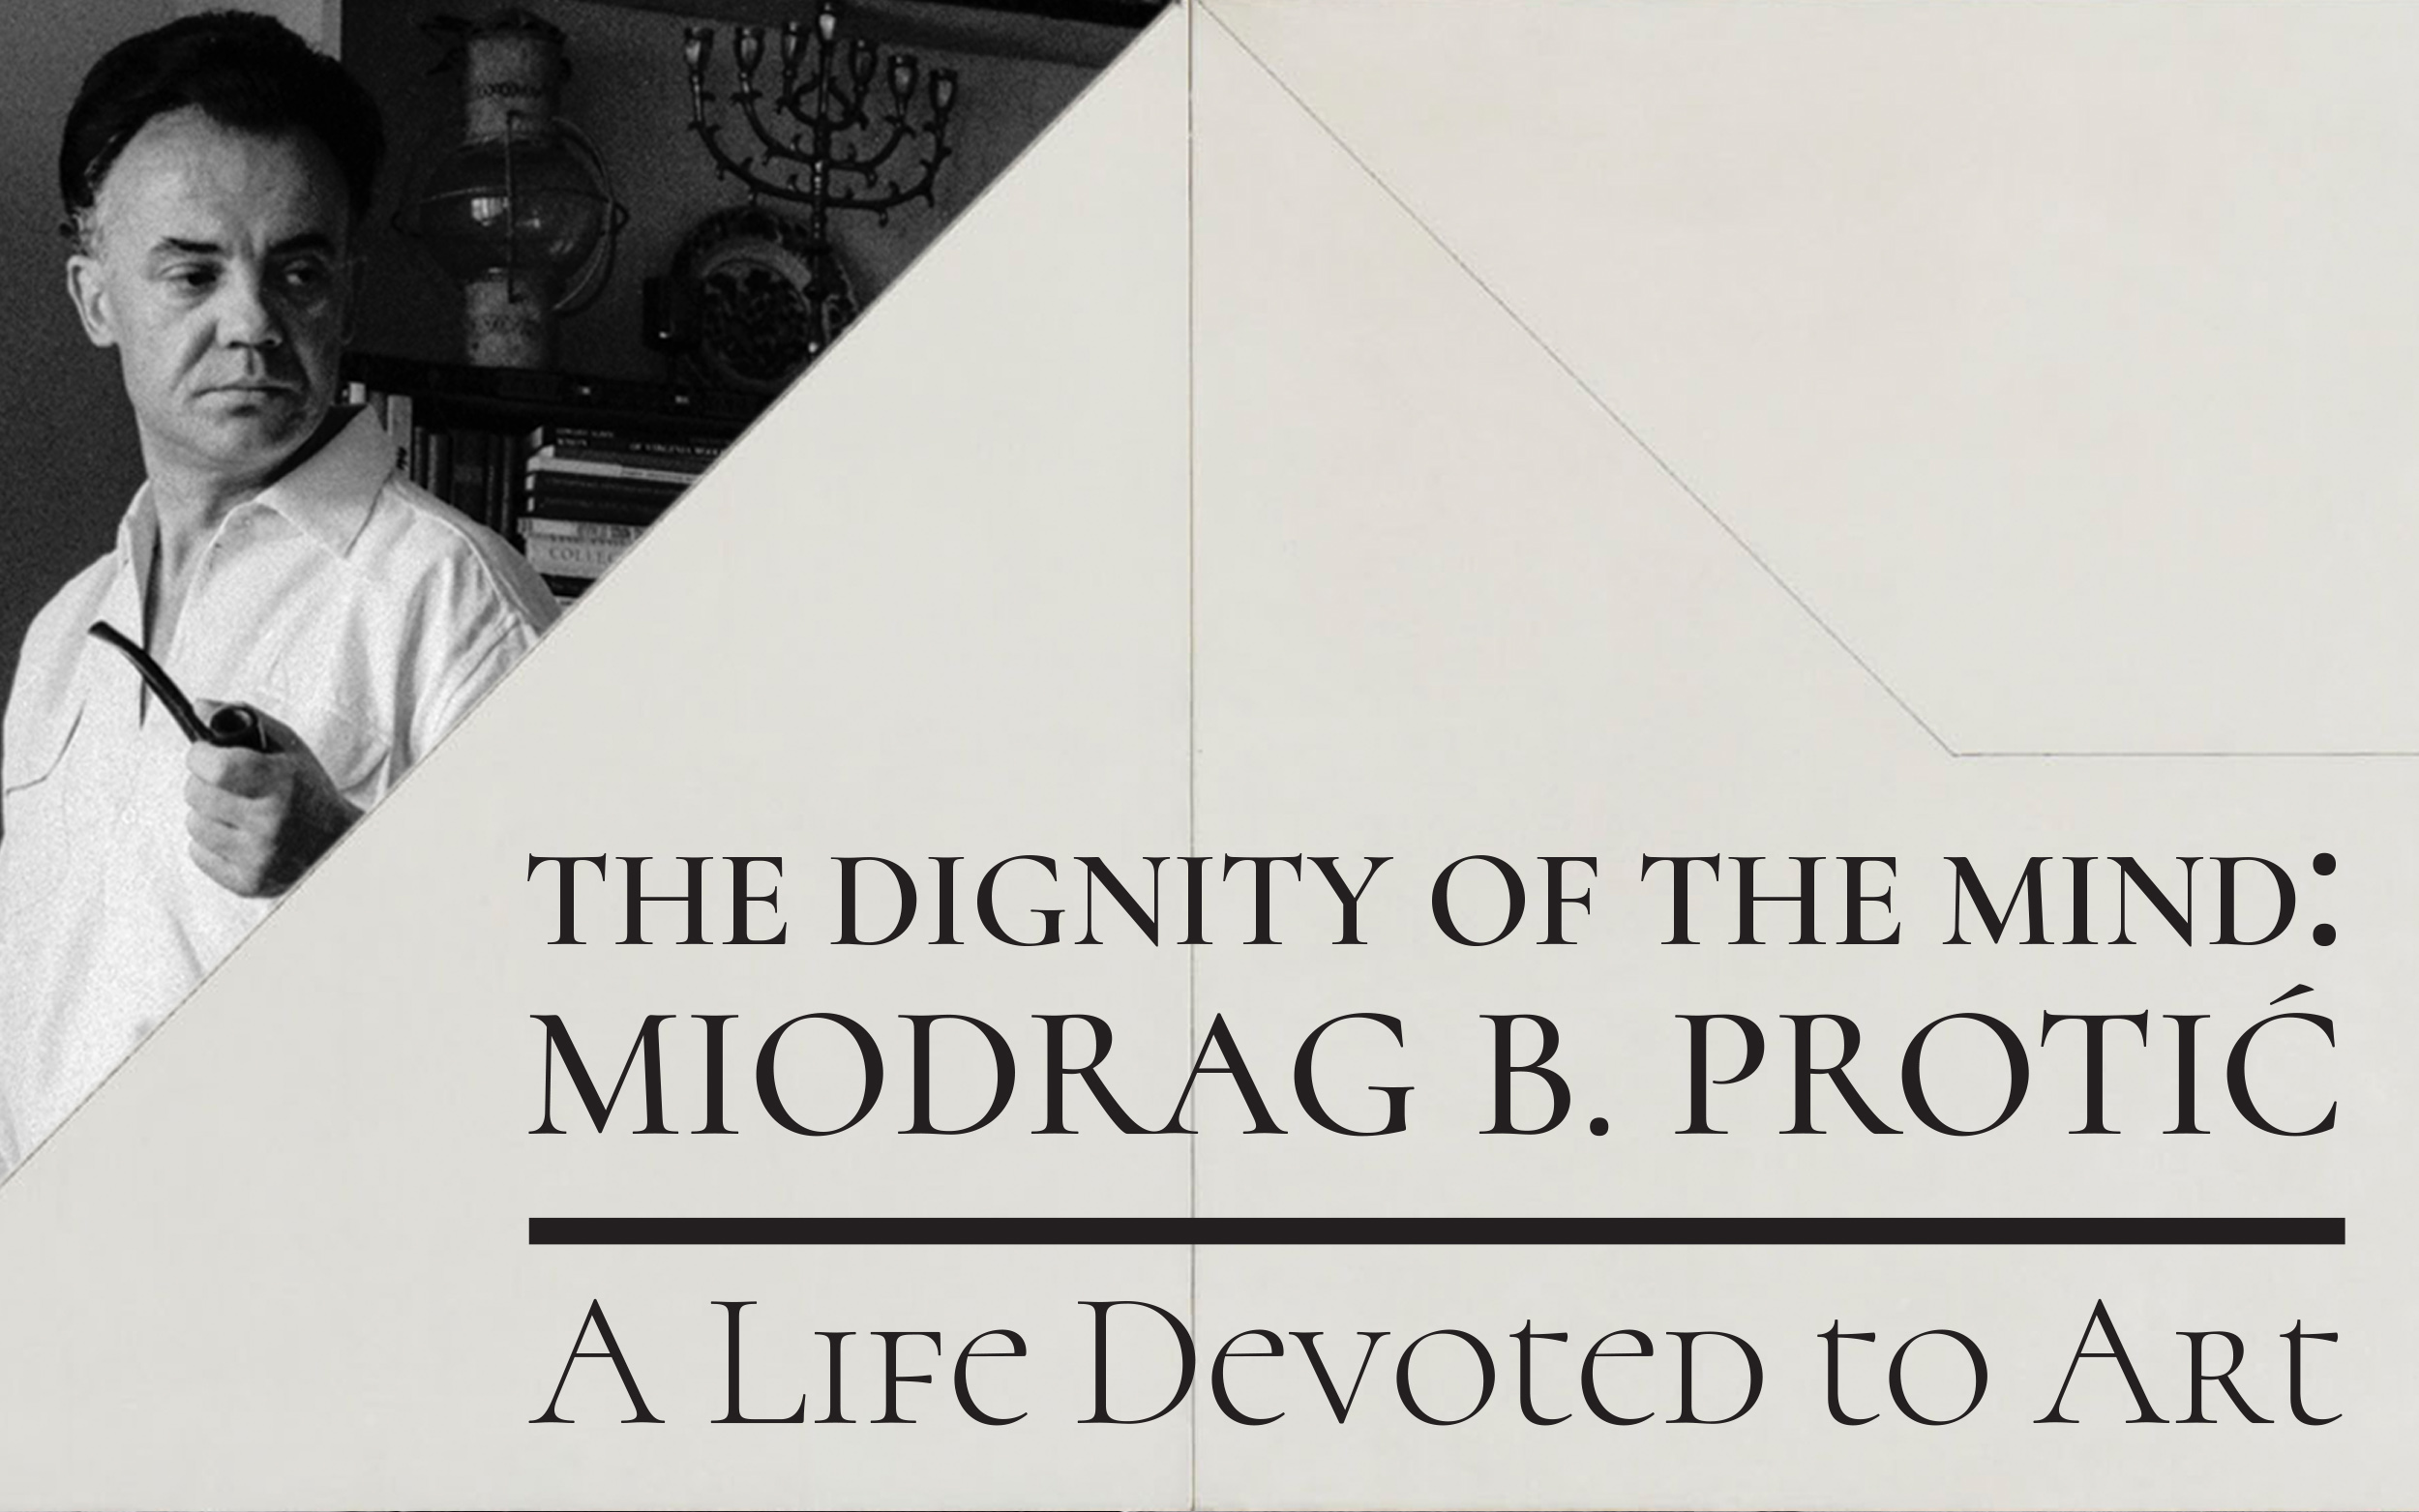 The Dignity of the Mind: Miodrag B. Protić, A Life Devoted to Art